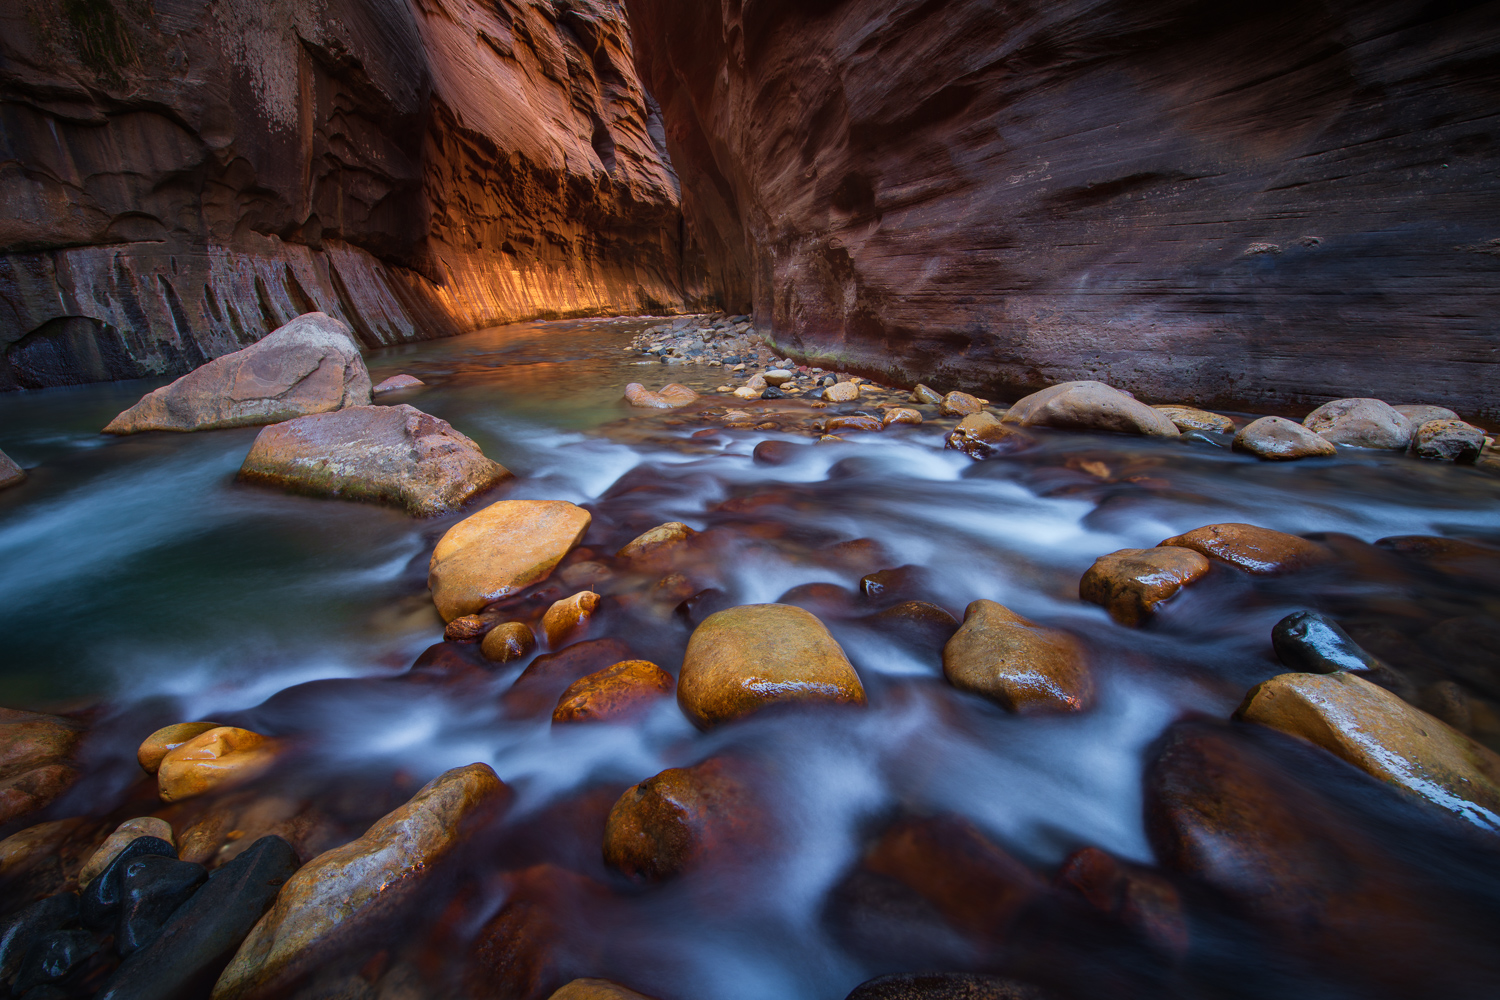 Glowing canyon walls and the Virgin River rushing over rocks in The Narrows of Zion National Park, Utah.